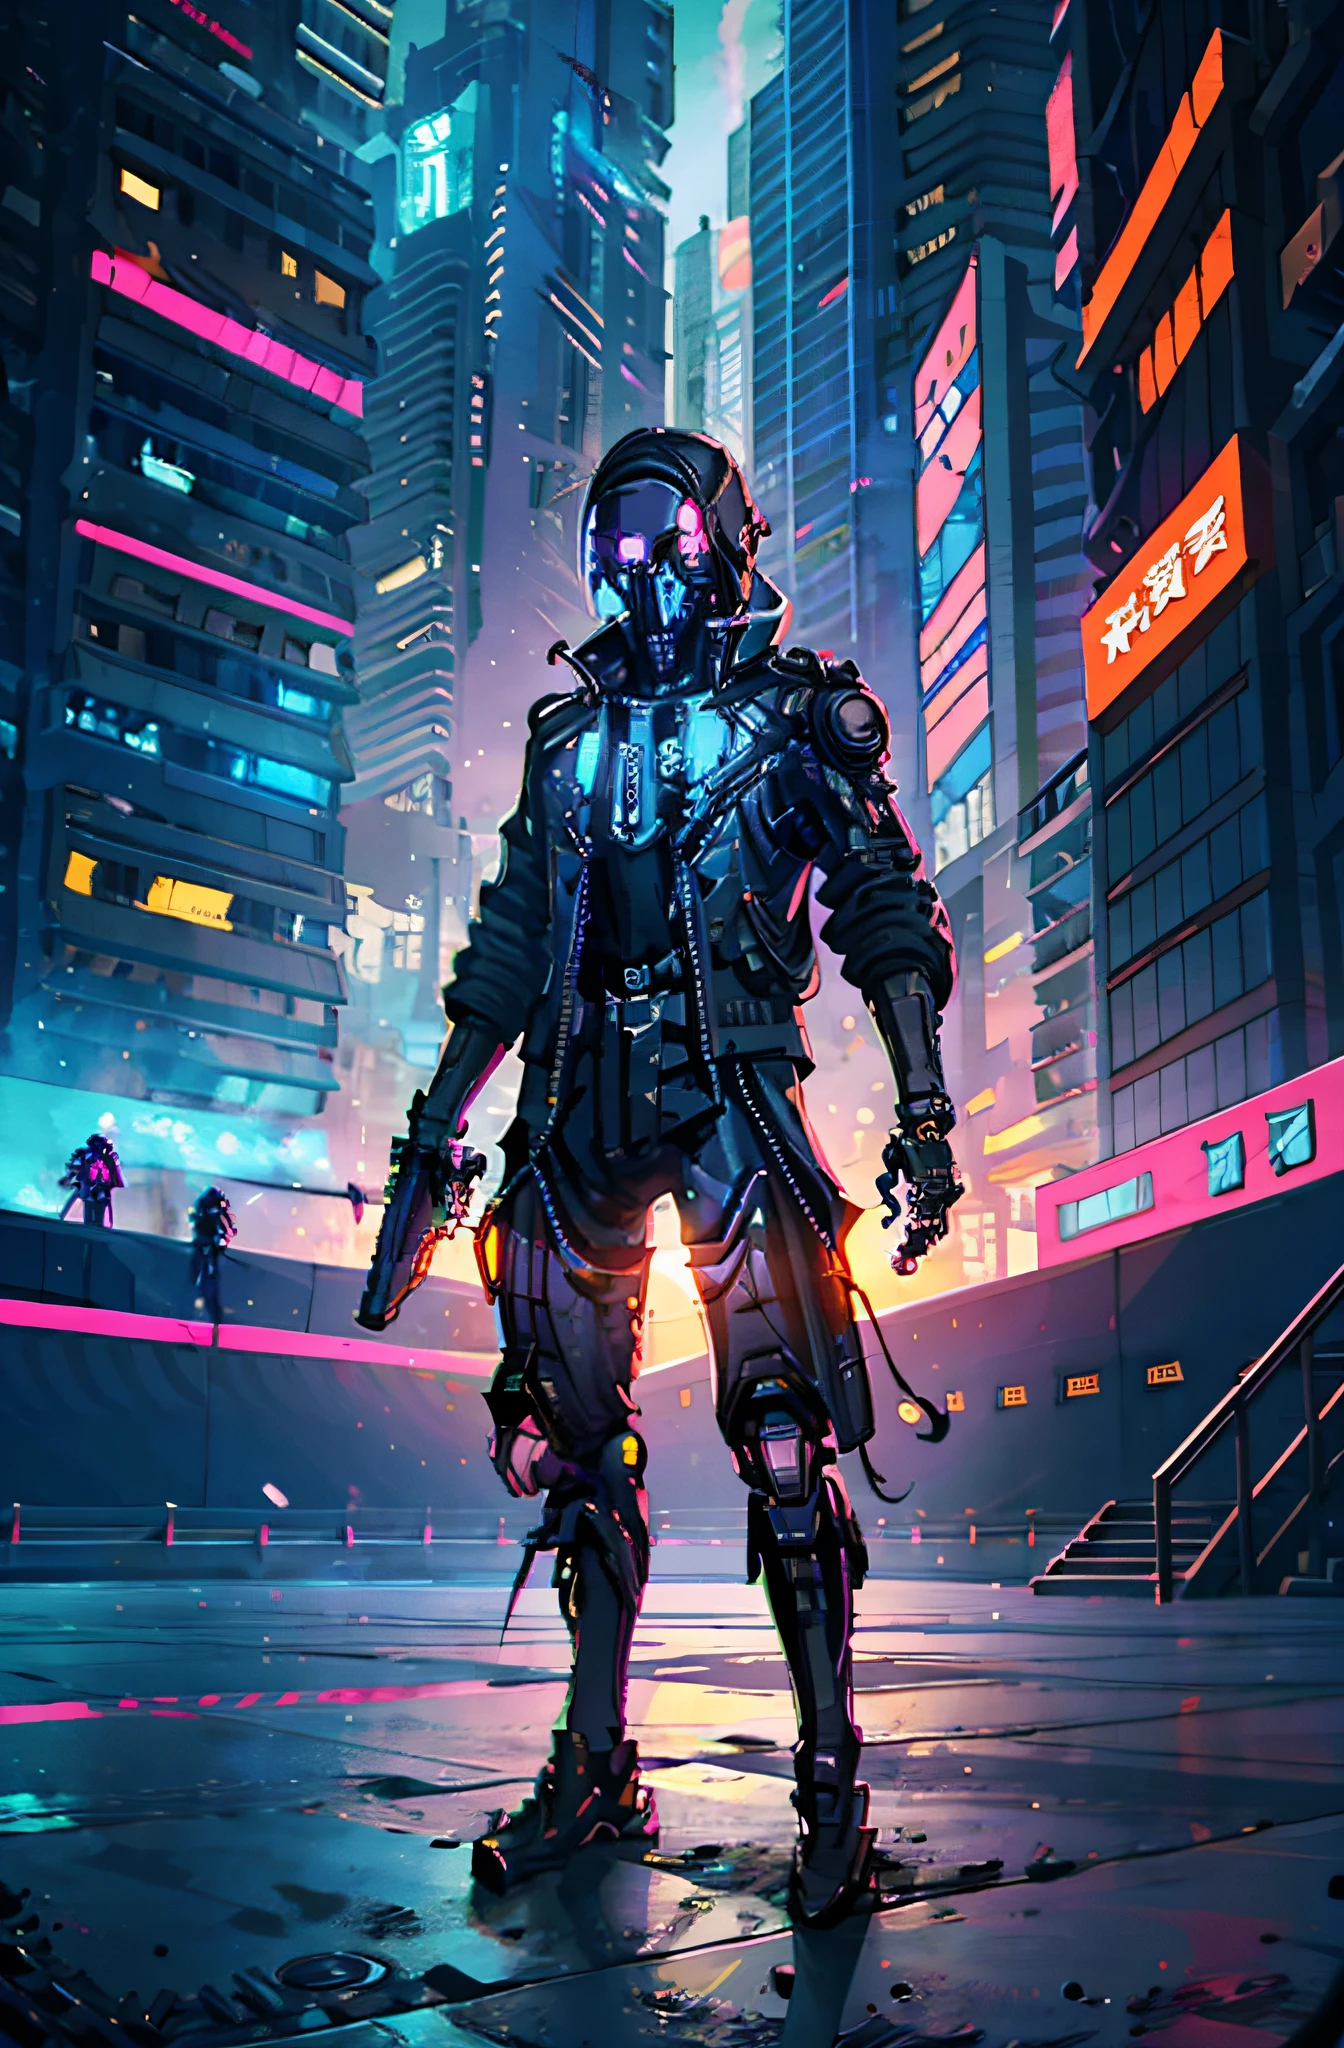 cyber soldier with gun in hand in a futuristic city(Skeleton), (skeleton), (ciborg),cyberpunk art style, cyberpunk pixel art, cyberpunk art style, cyberpunk skeleton, cyberpunk anime art, cyberpunk digital anime art, highly detailed cyberpunk, digital cyberpunk - anime art, detailed cyberpunk illustration, cyberpunk shading, cyberpunk themed art, cyberspace cowboy,  Cyberpunk anime art, Cyberpunk art, vibrant colors of cyberpunk, (anatomically correct)